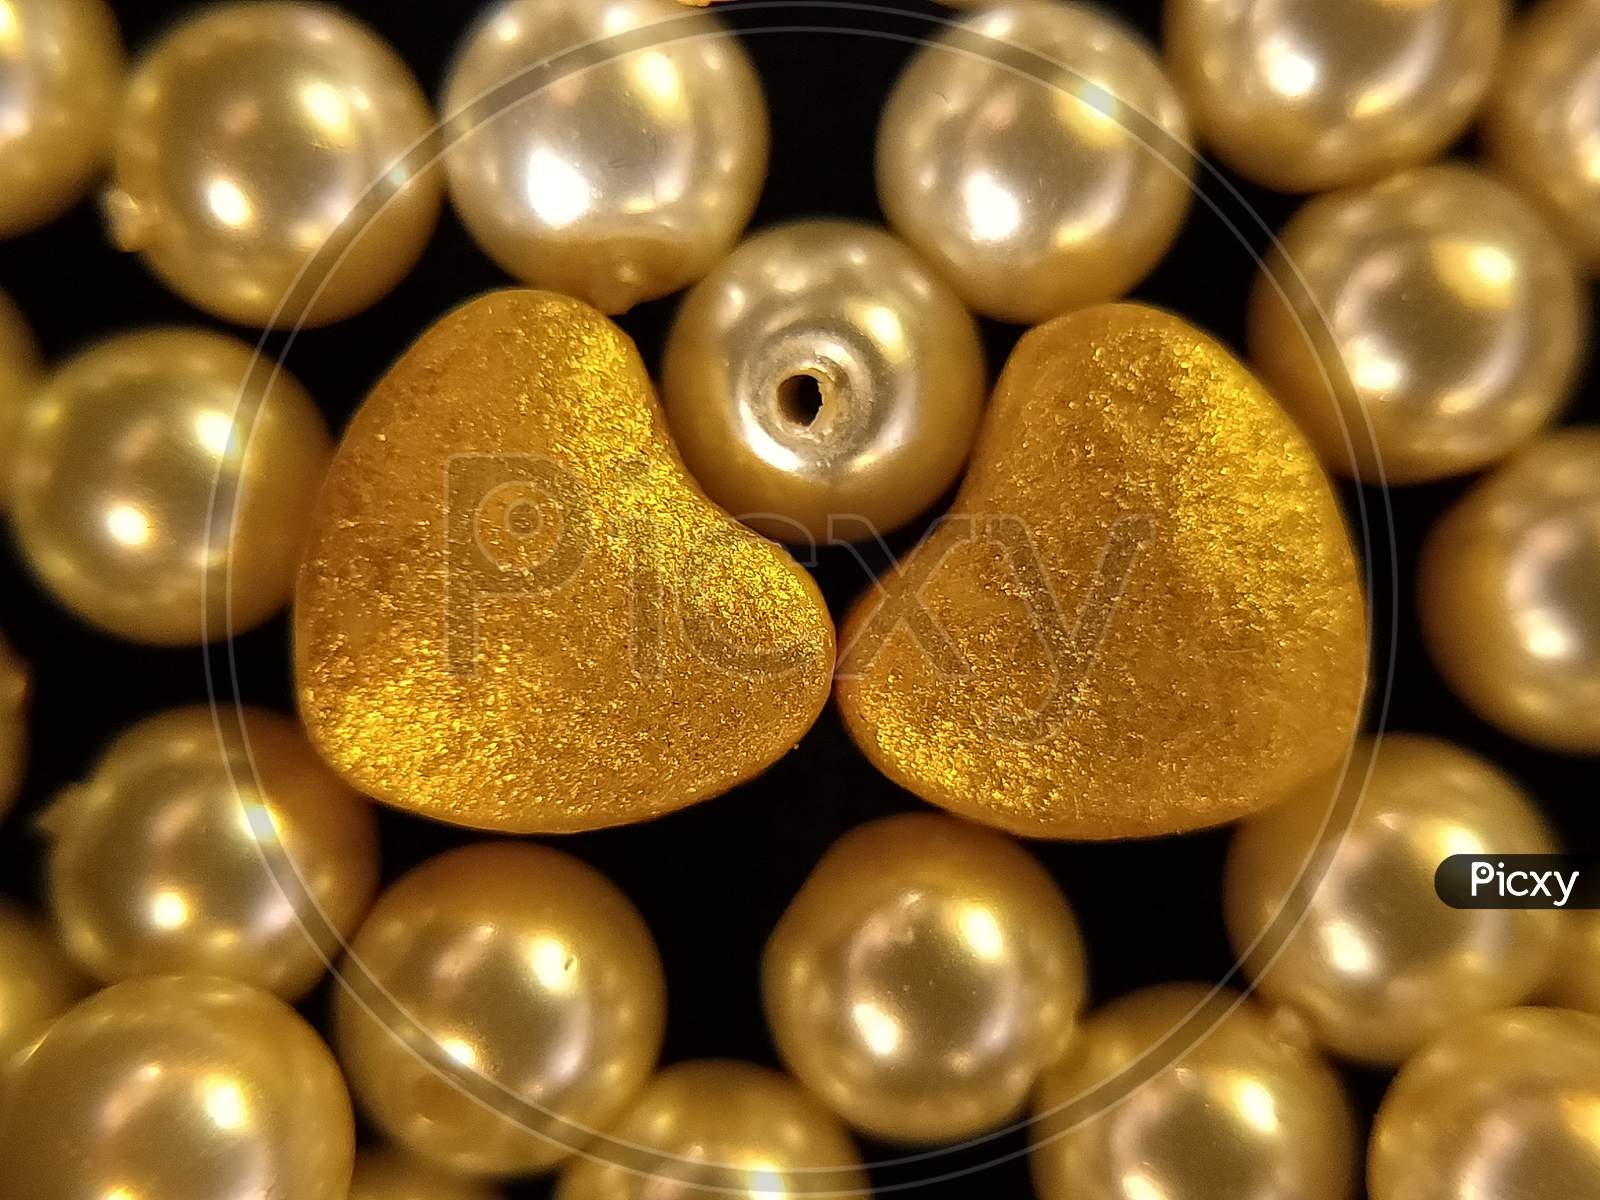 American pearls with heart shaped object. Golden hearts and pearls. Close up of pearls.